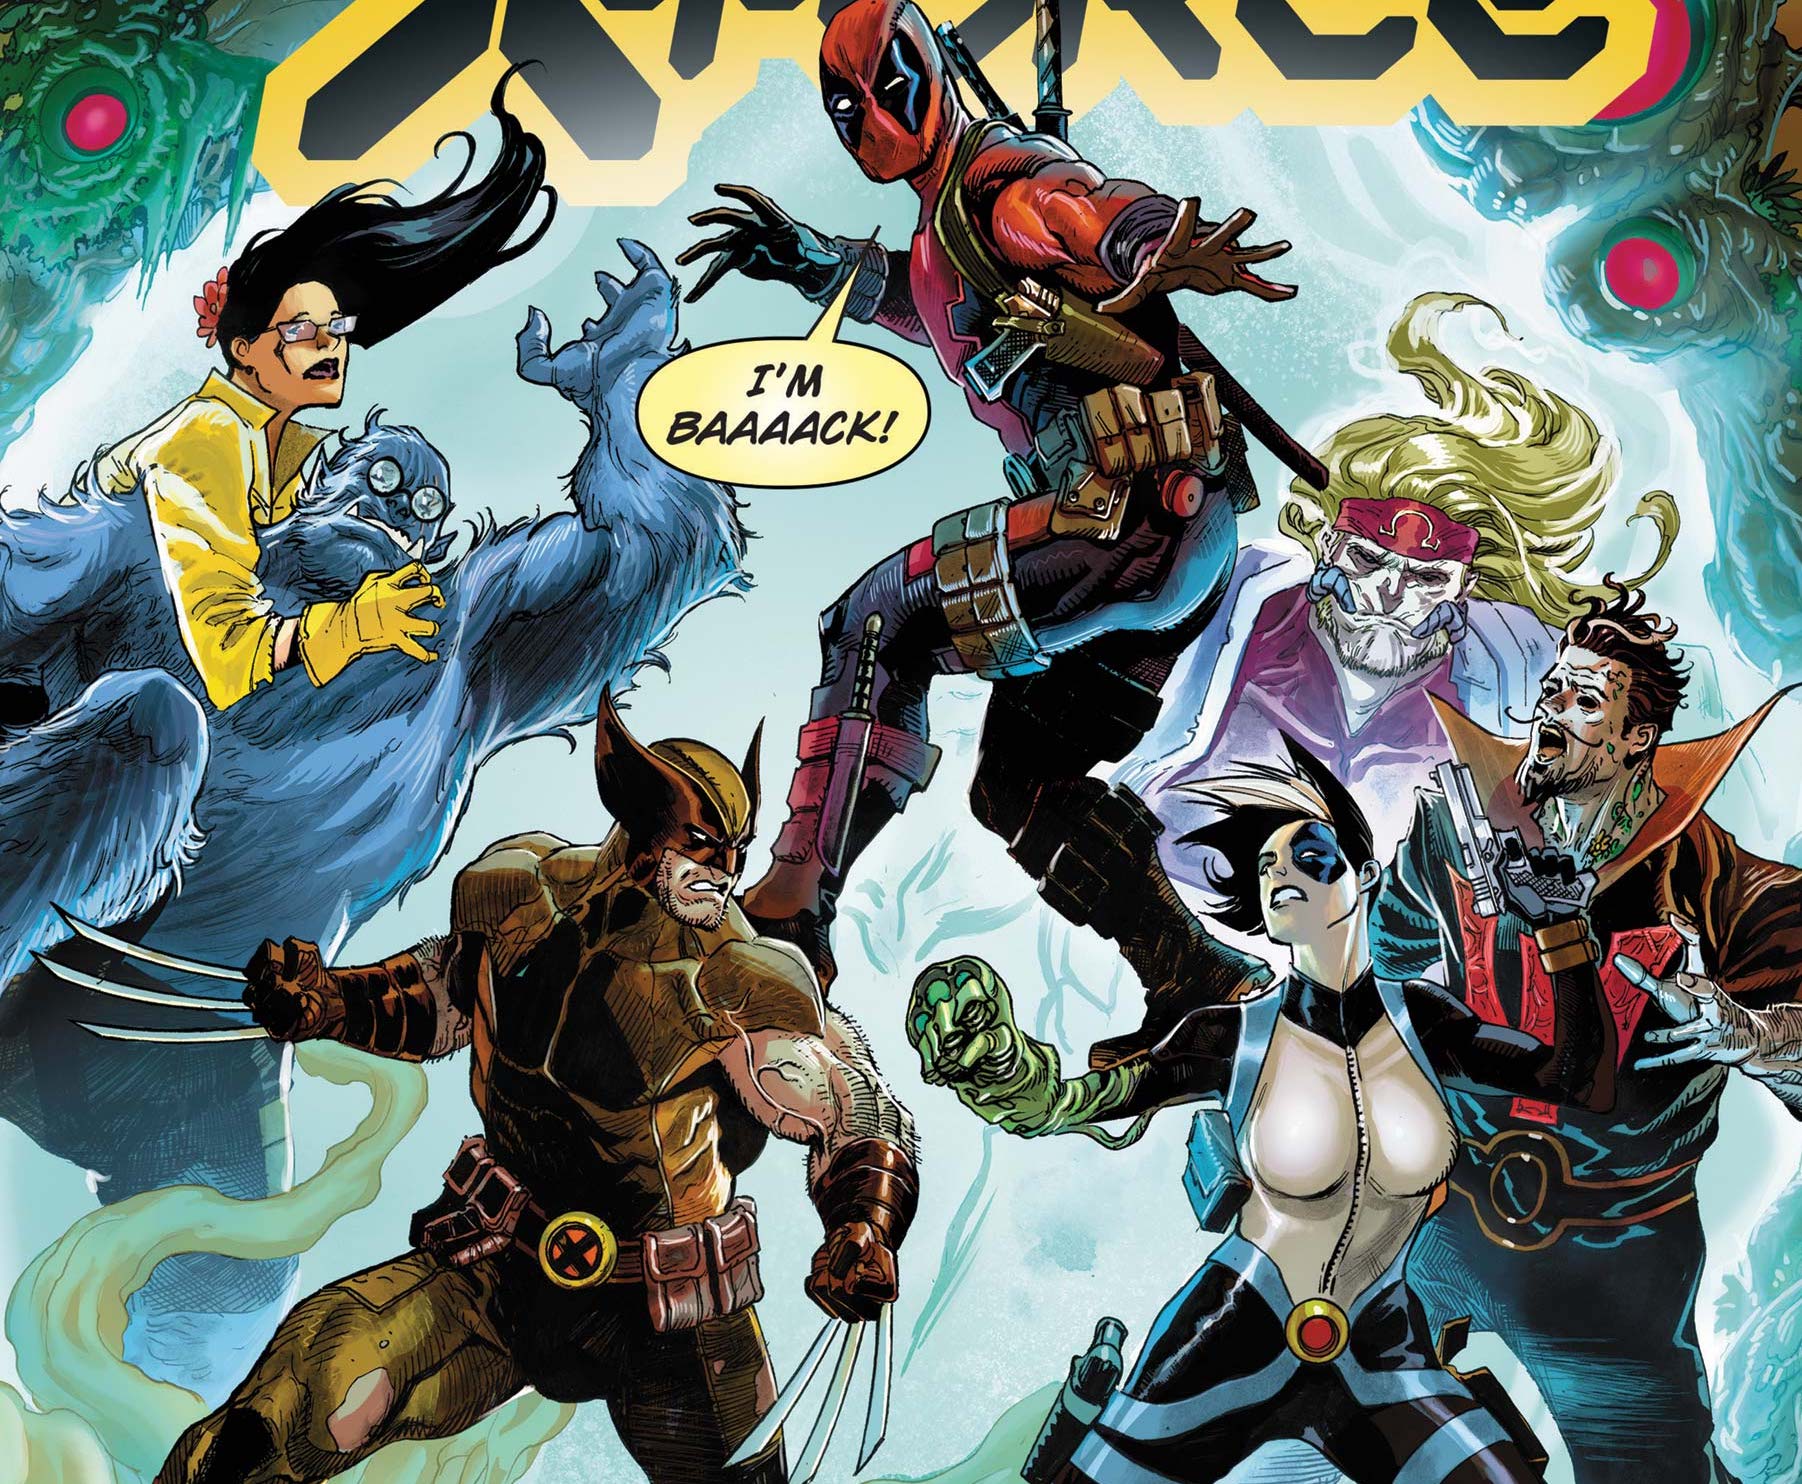 'X-Force' #30 continues to show how to maximize entertainment